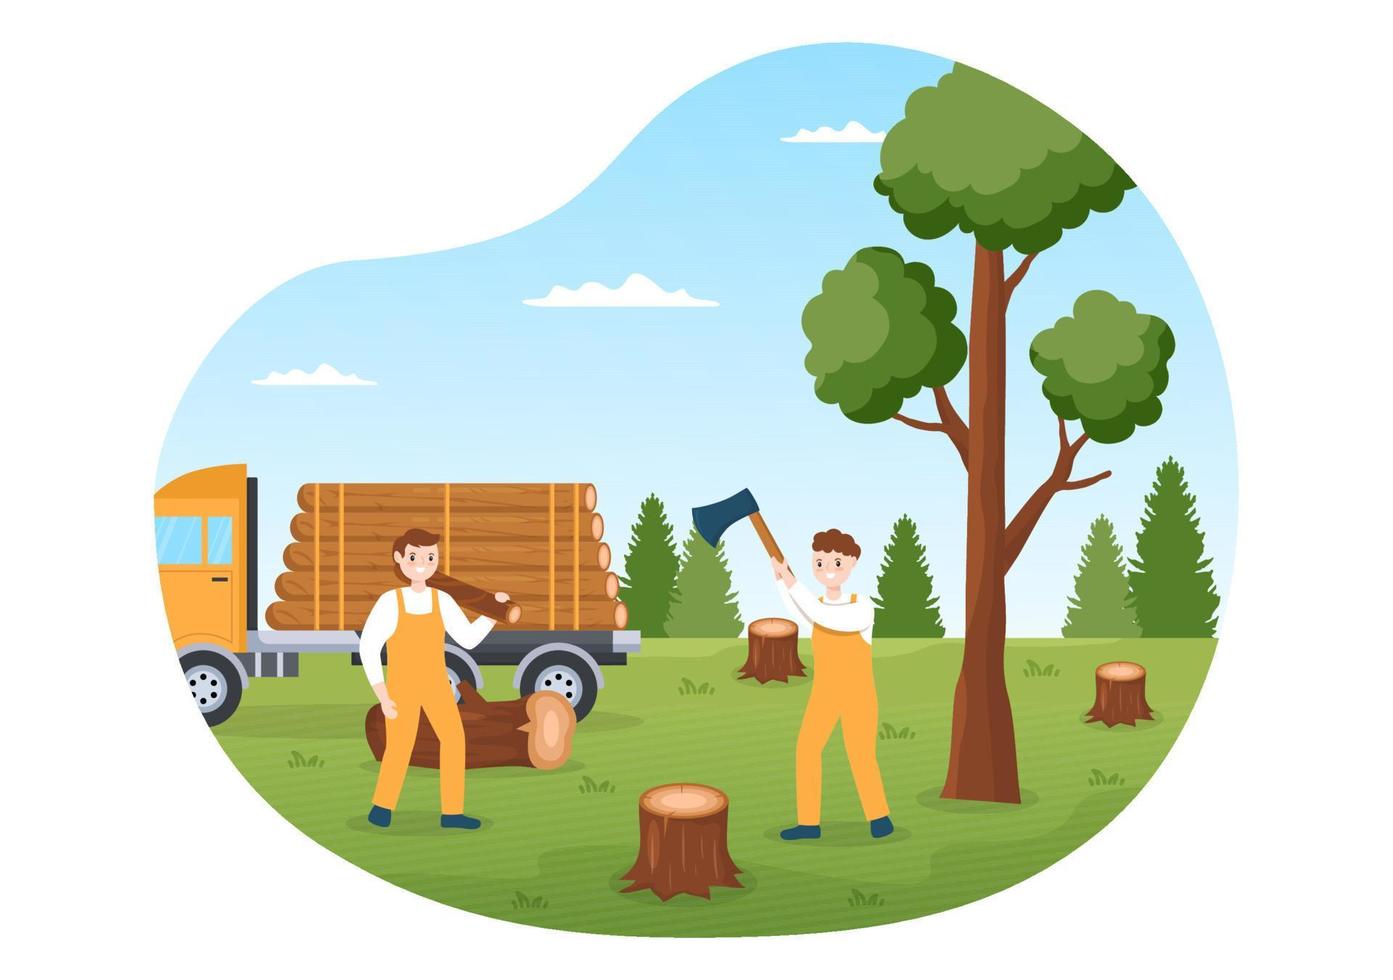 People Tree Cutting and Timber with Truck, Chainsaw Wooden and Tools Logging in the Forest on Flat Cartoon Hand Drawn Templates Illustration vector